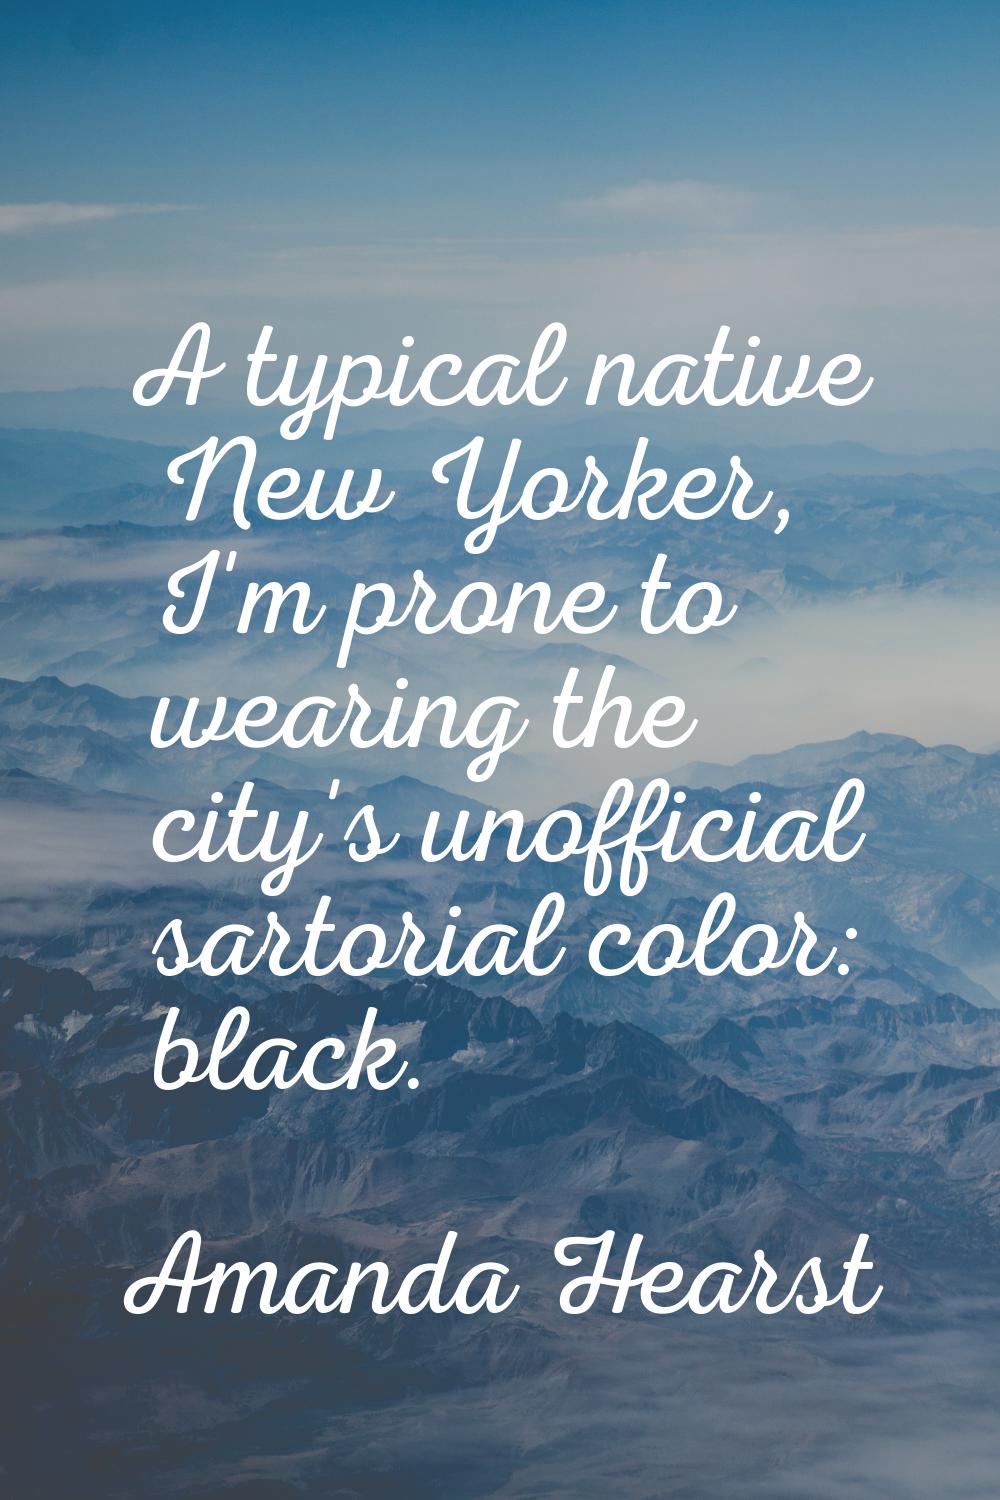 A typical native New Yorker, I'm prone to wearing the city's unofficial sartorial color: black.